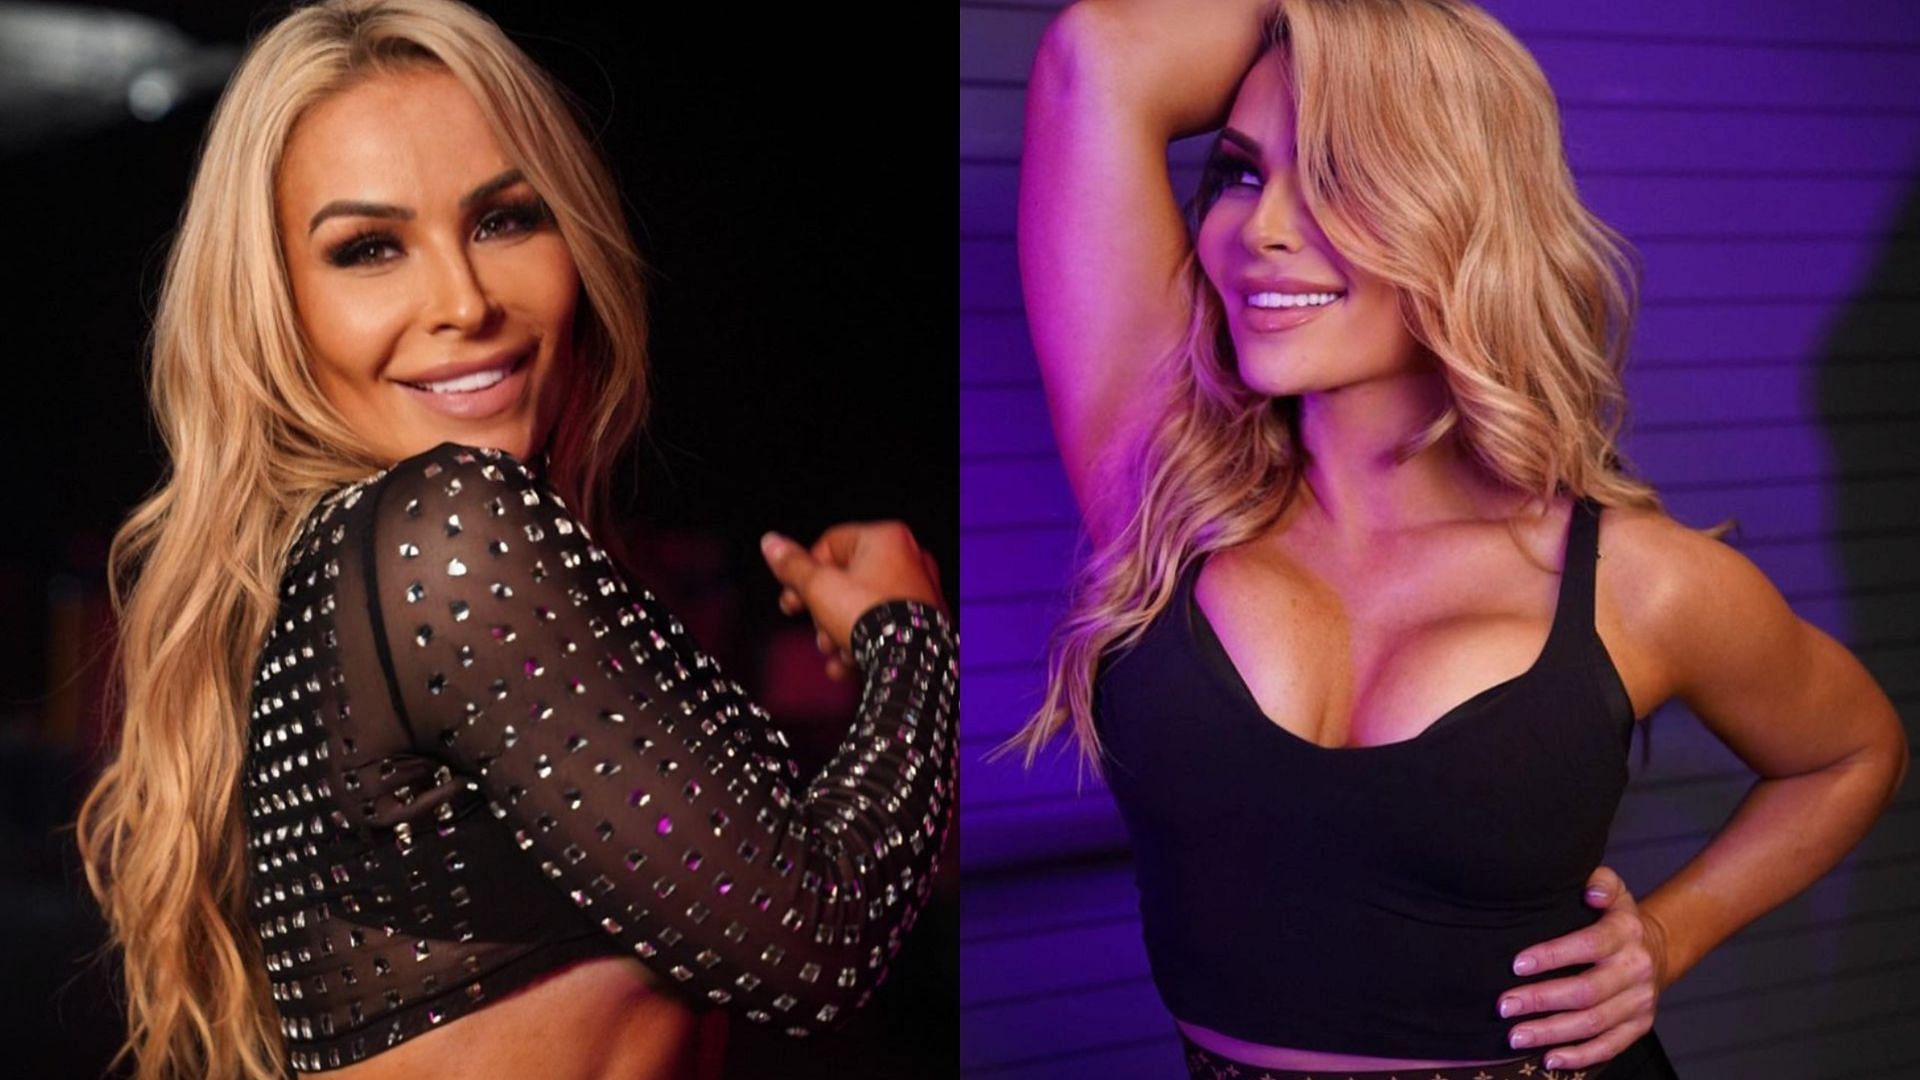 Natalya was selected by RAW in this year